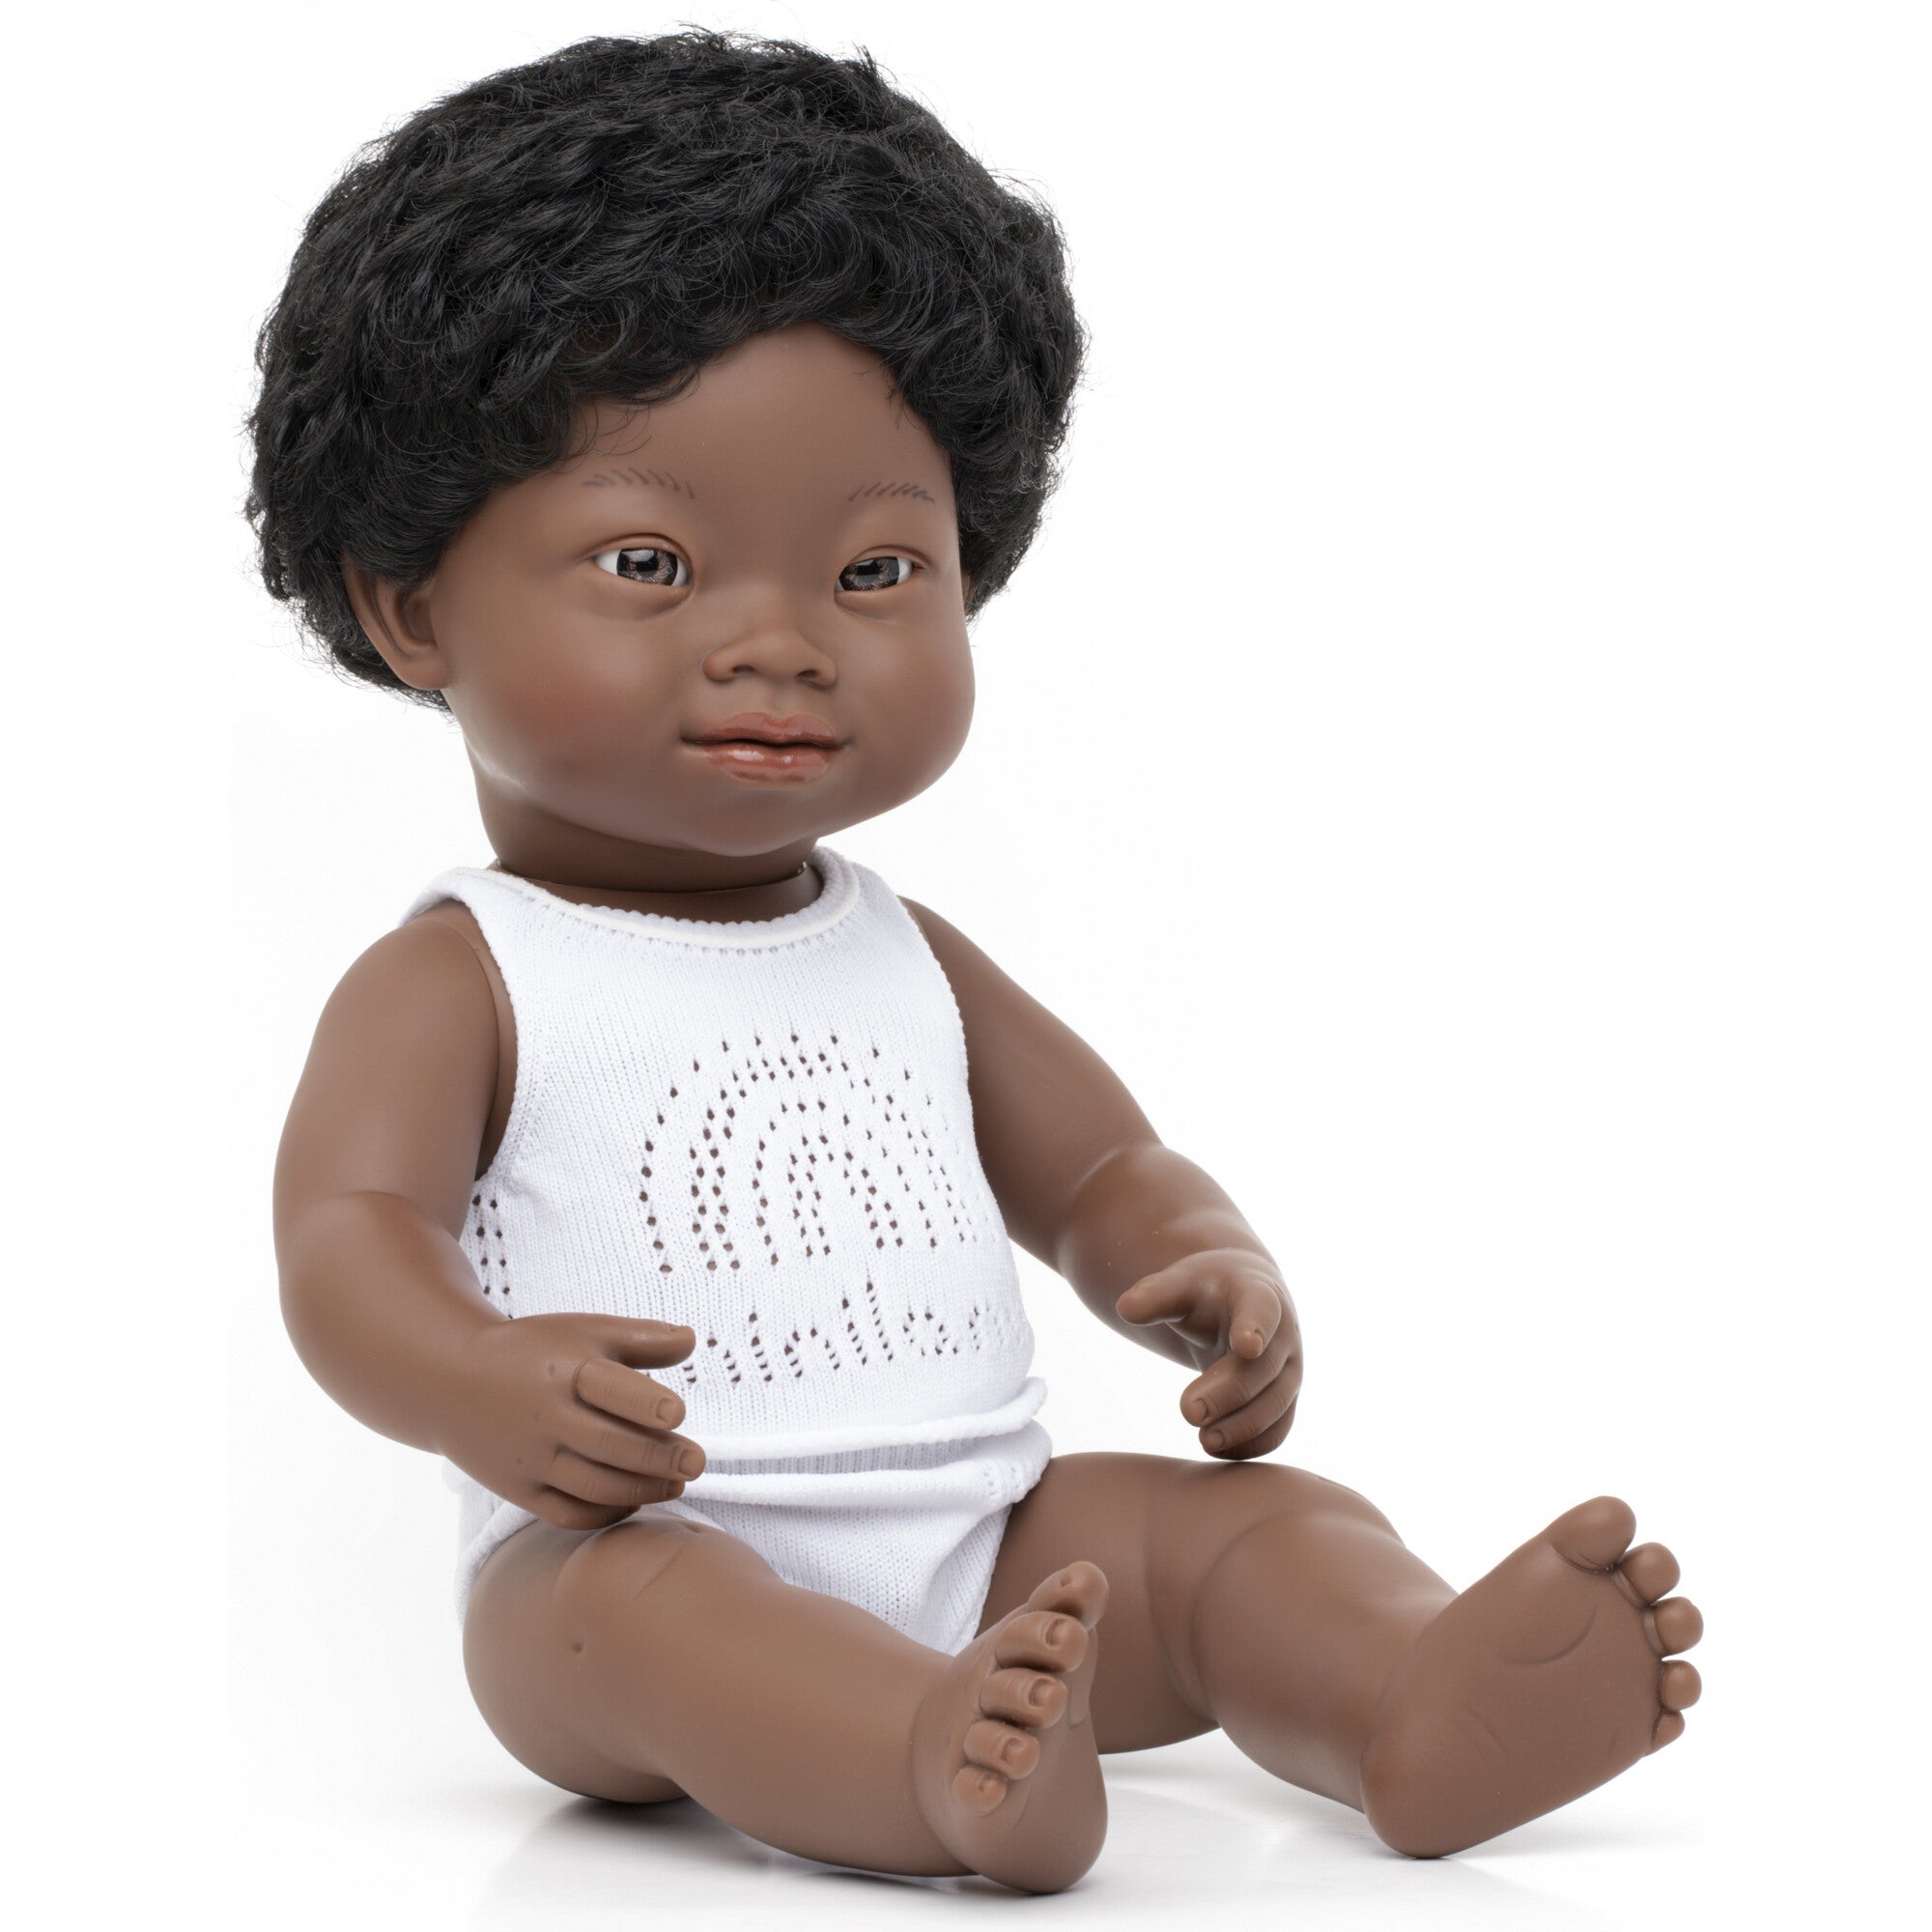 Miniland Baby Doll African Boy with Down Syndrome 15" Dolls